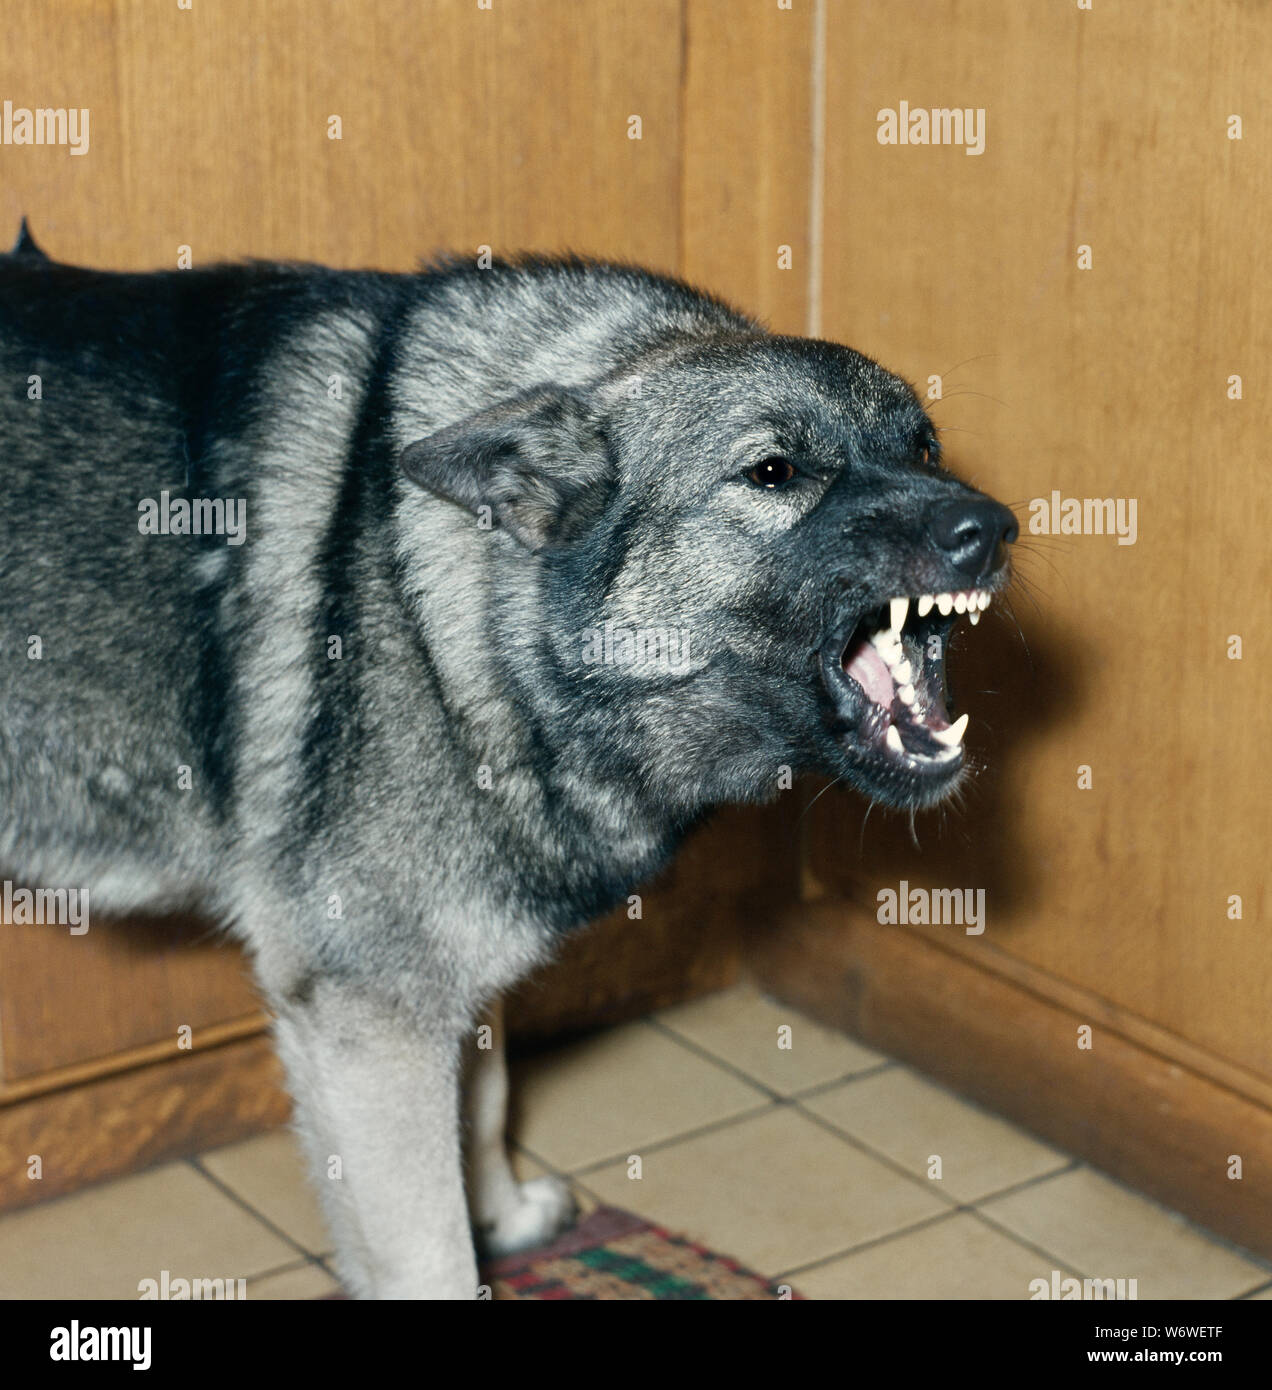 ELKHOUND  Domestic breed of dog (Canis lupus familiaris), snarling, showing open jaws and teeth. Stock Photo